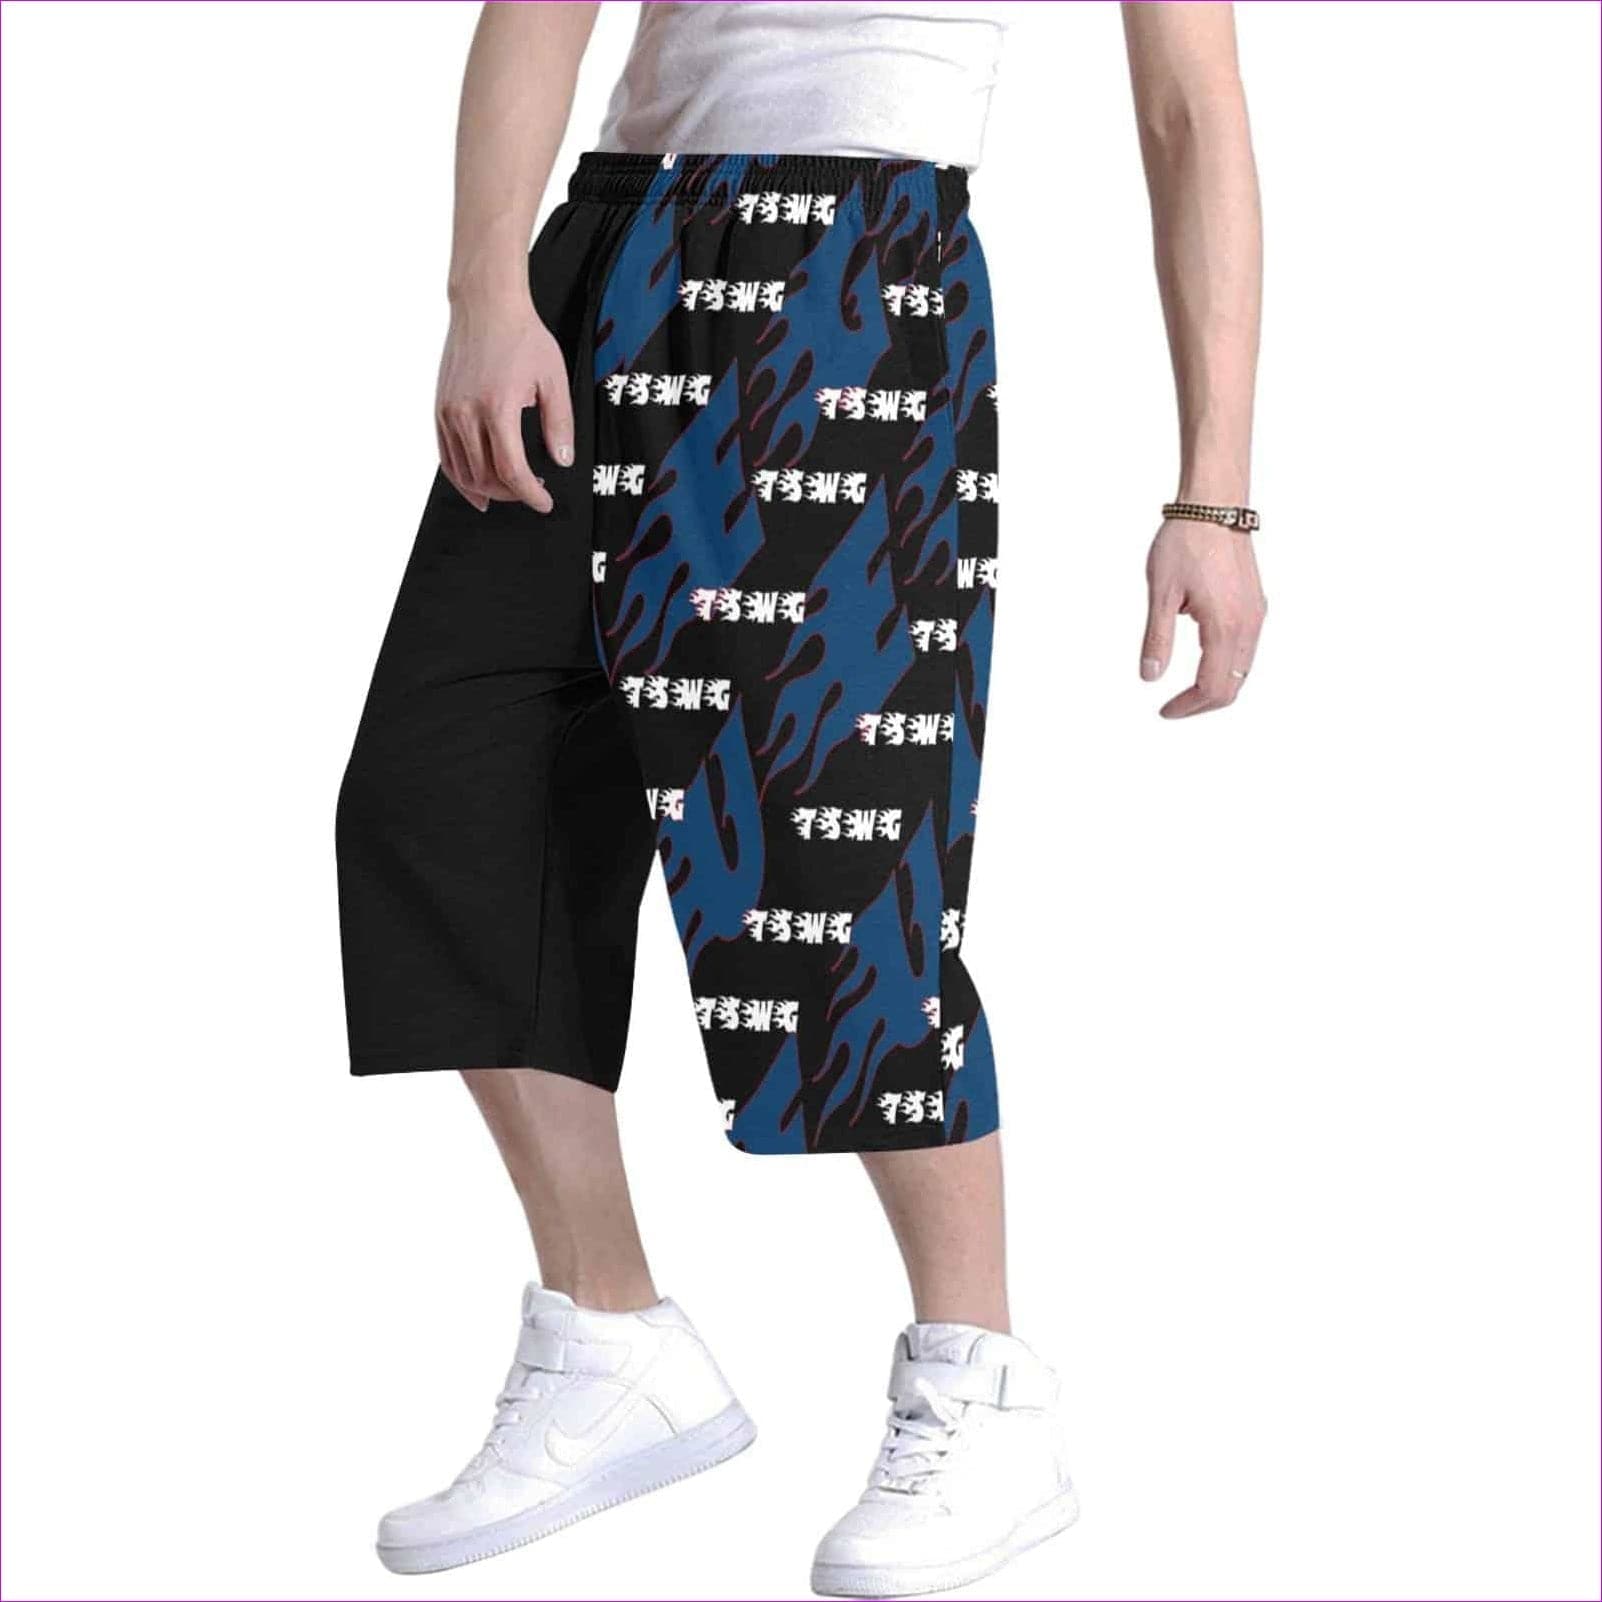 TSWG Fuego Flame - Blue Men's All Over Print Baggy Shorts (Model L37) - TSWG Fuego Flame Baggy Shorts for Men - 2 styles - mens shorts at TFC&H Co.